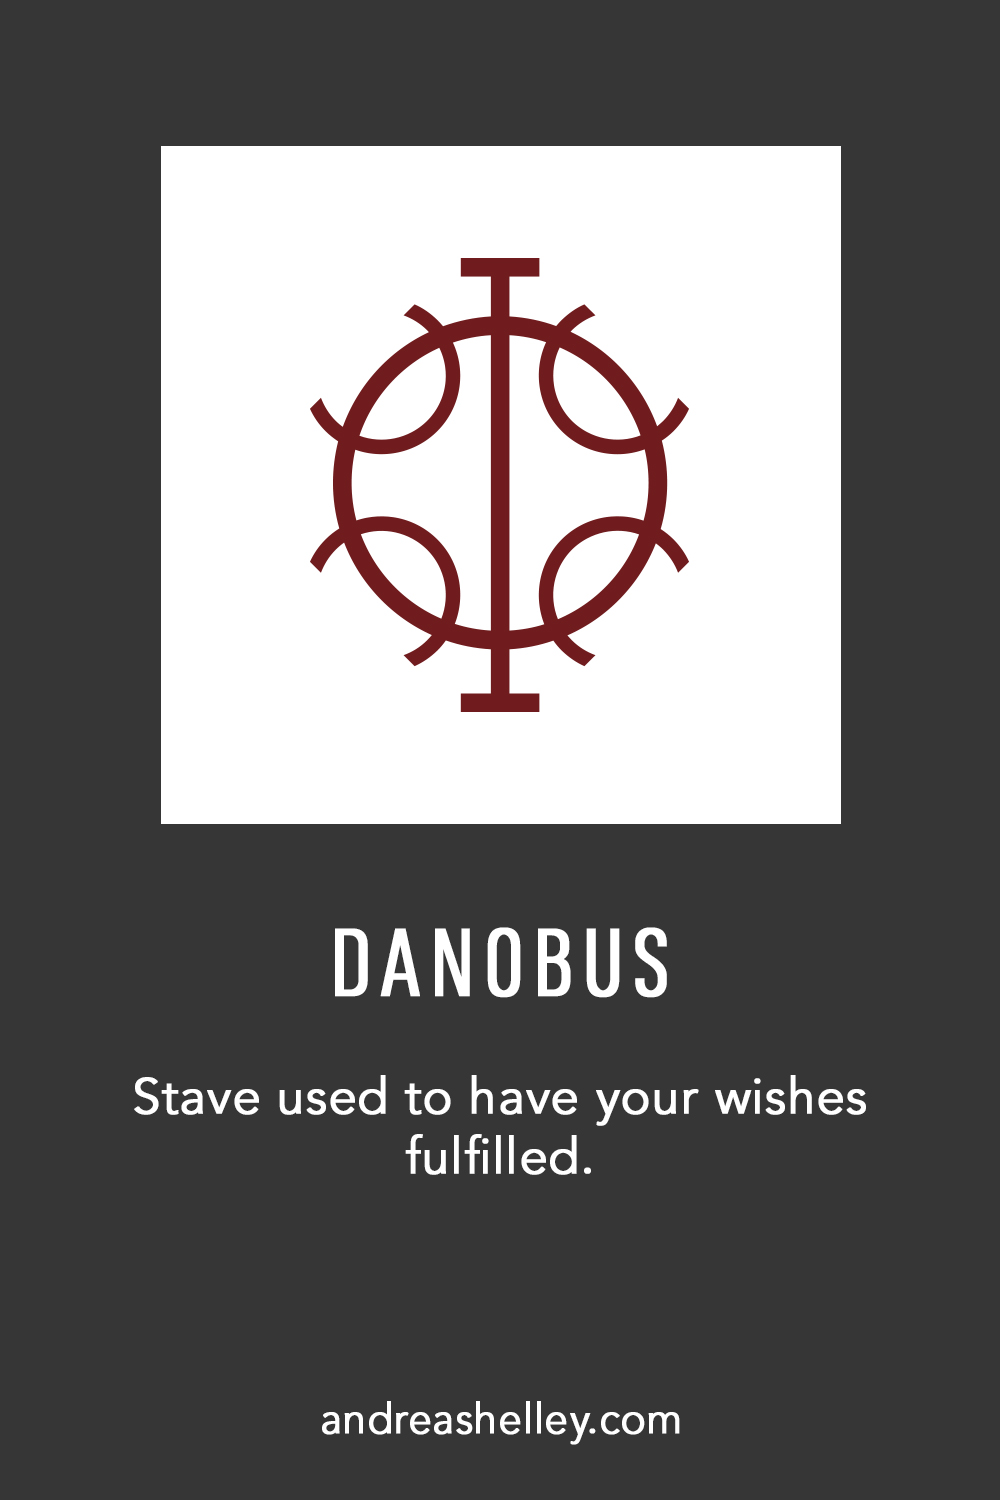 Danobus stave used to get your wish fulfilled.